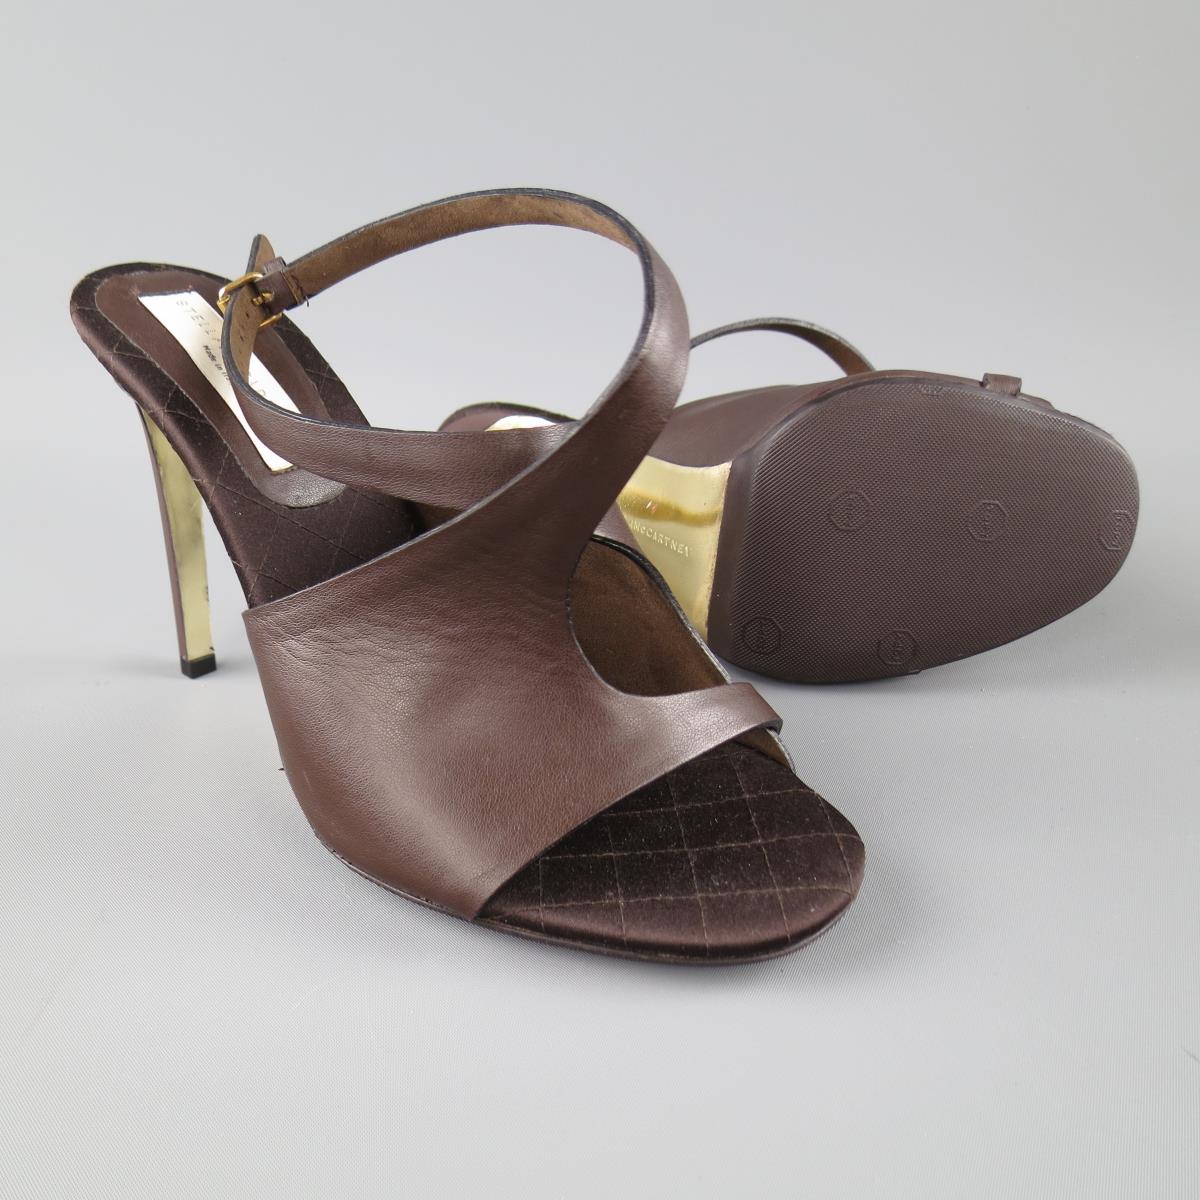 STELLA McCARTNEY Size 10.5 Brown Faux Leather Peep Toe Ankle Strap Sandals